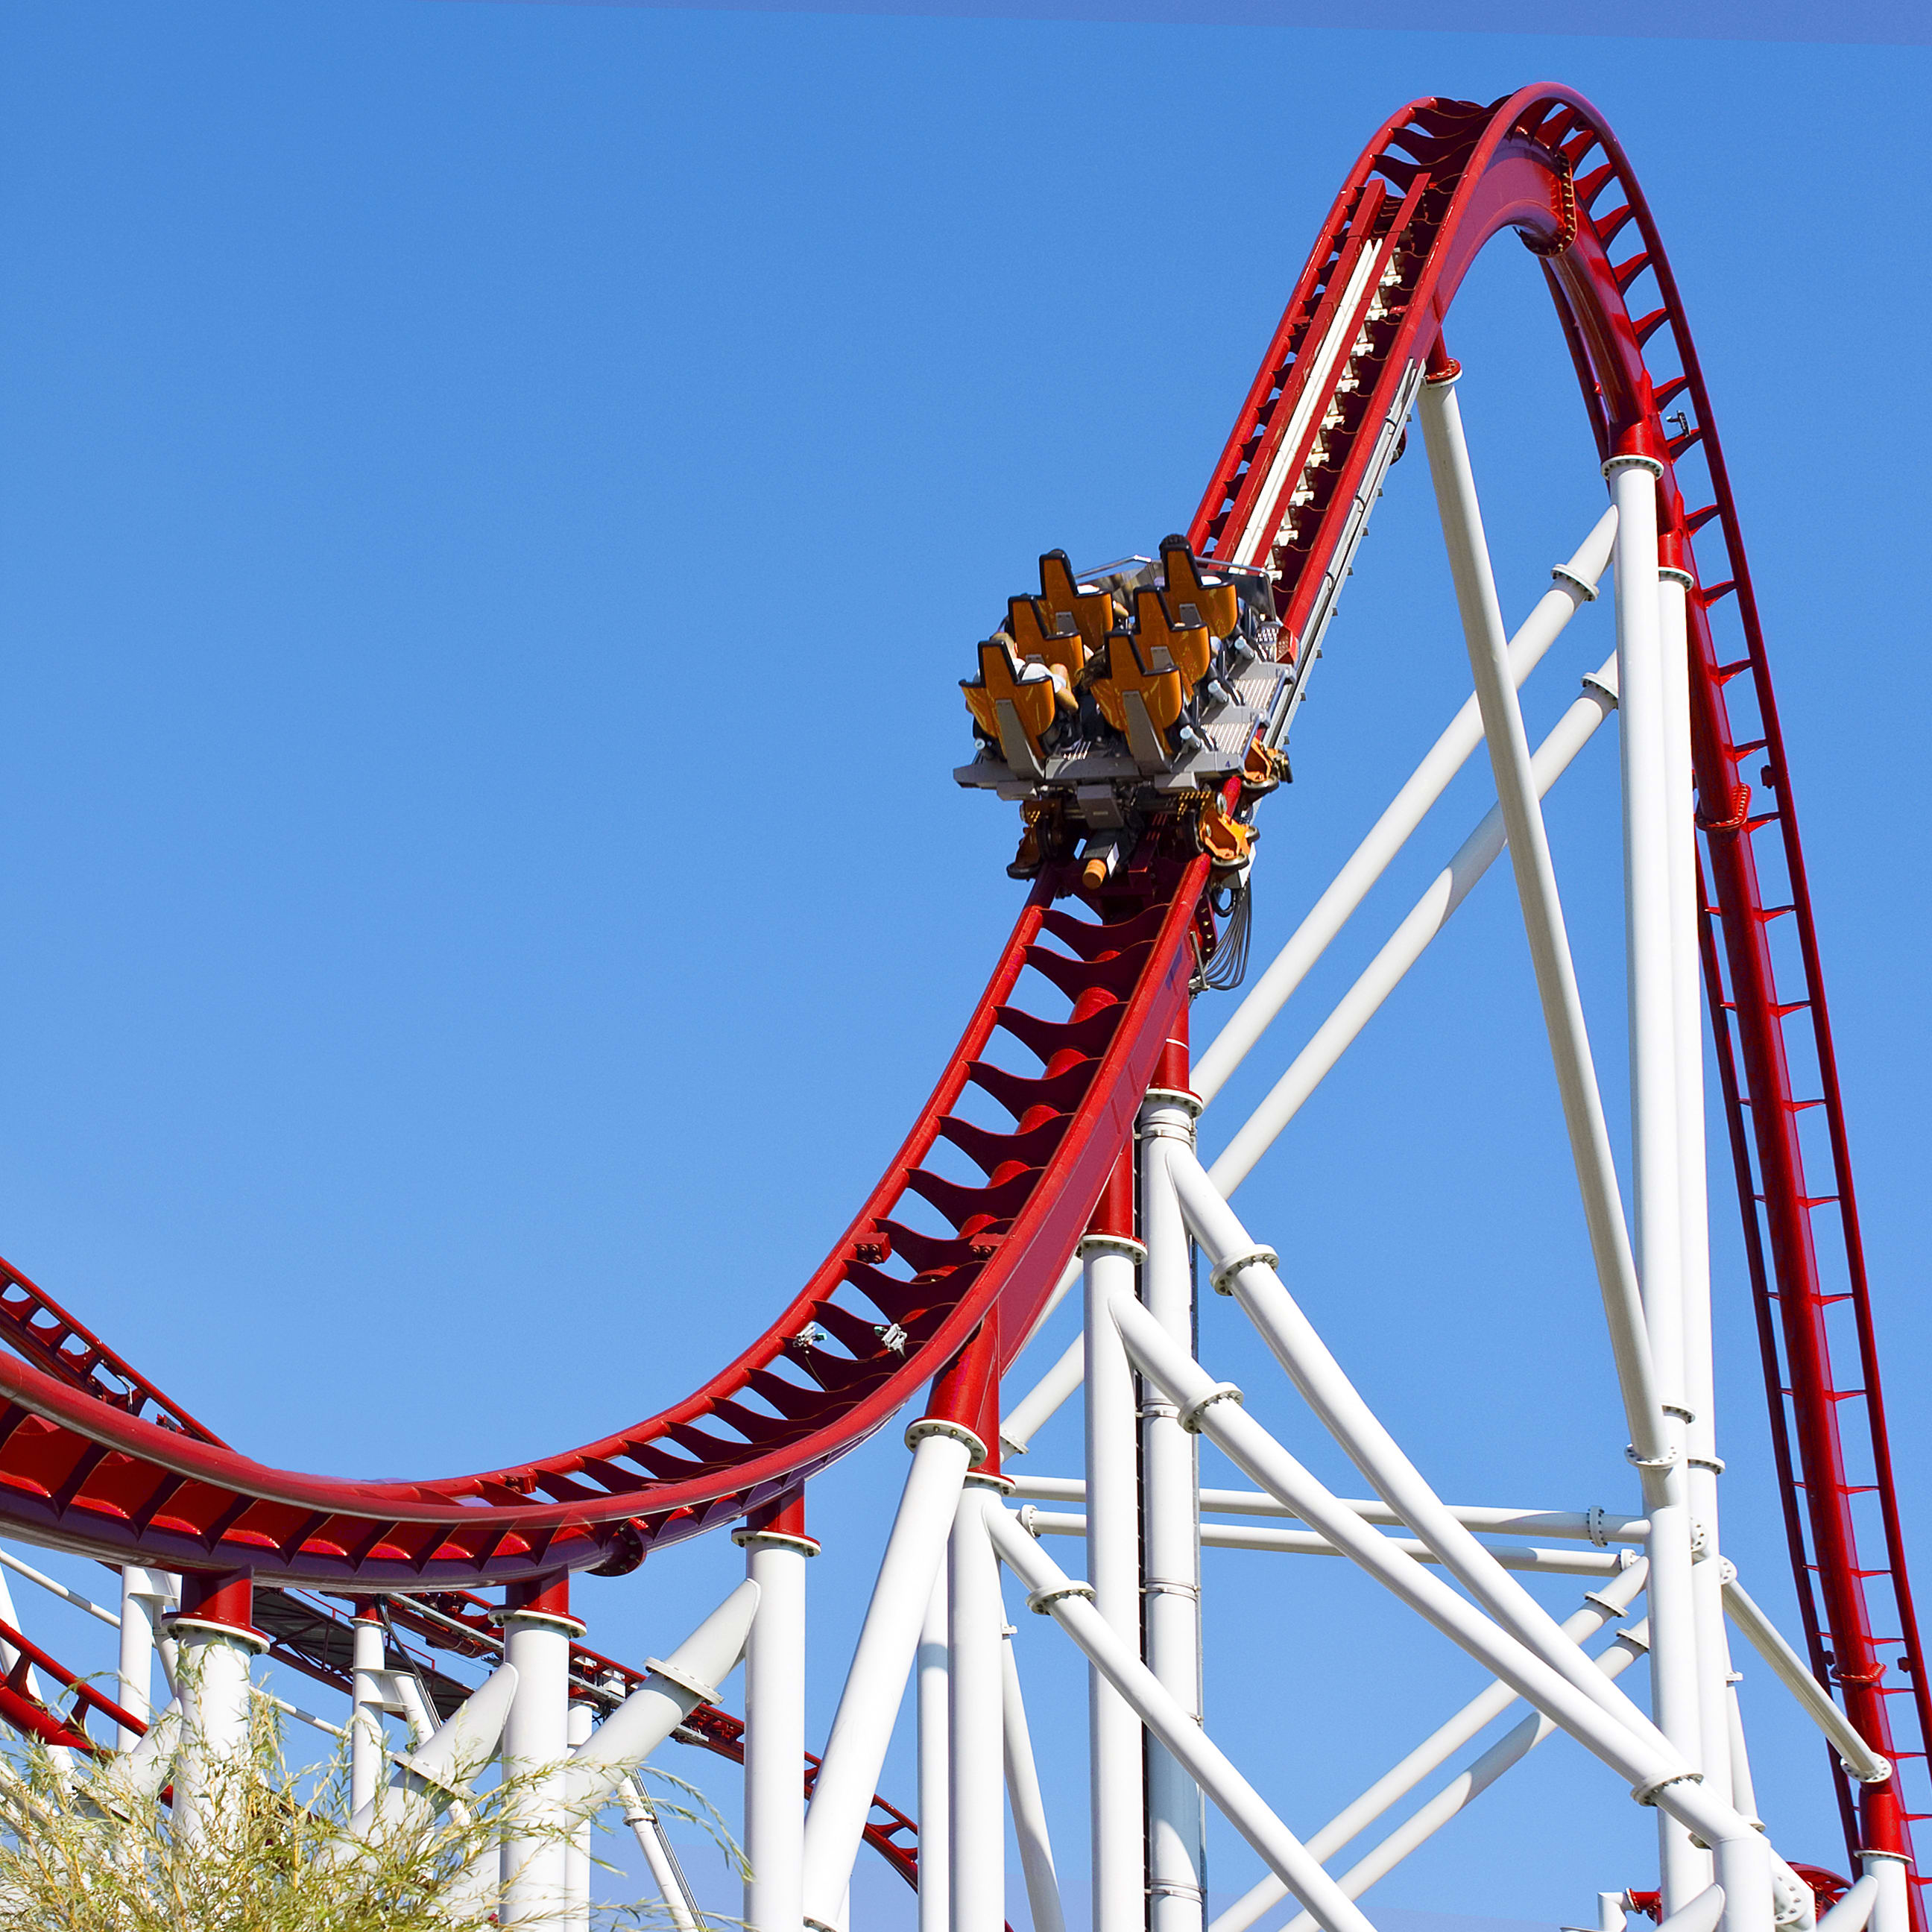 What makes roller coasters go so fast?